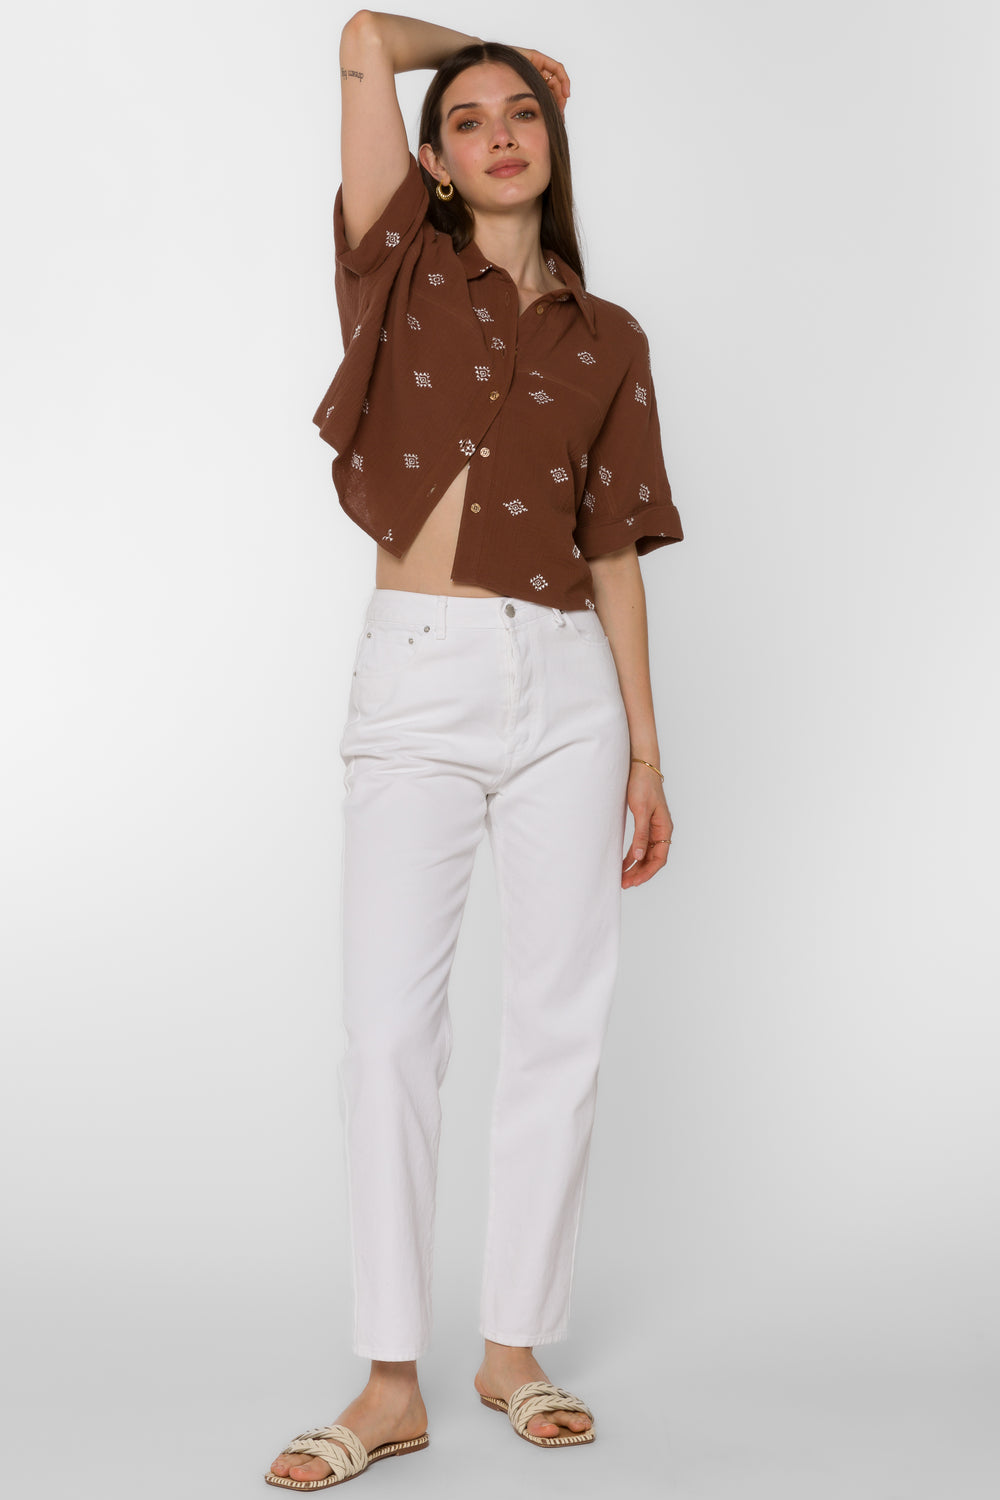 Trista Rustic Brown Embroidery  Shirt - Tops - Velvet Heart Clothing